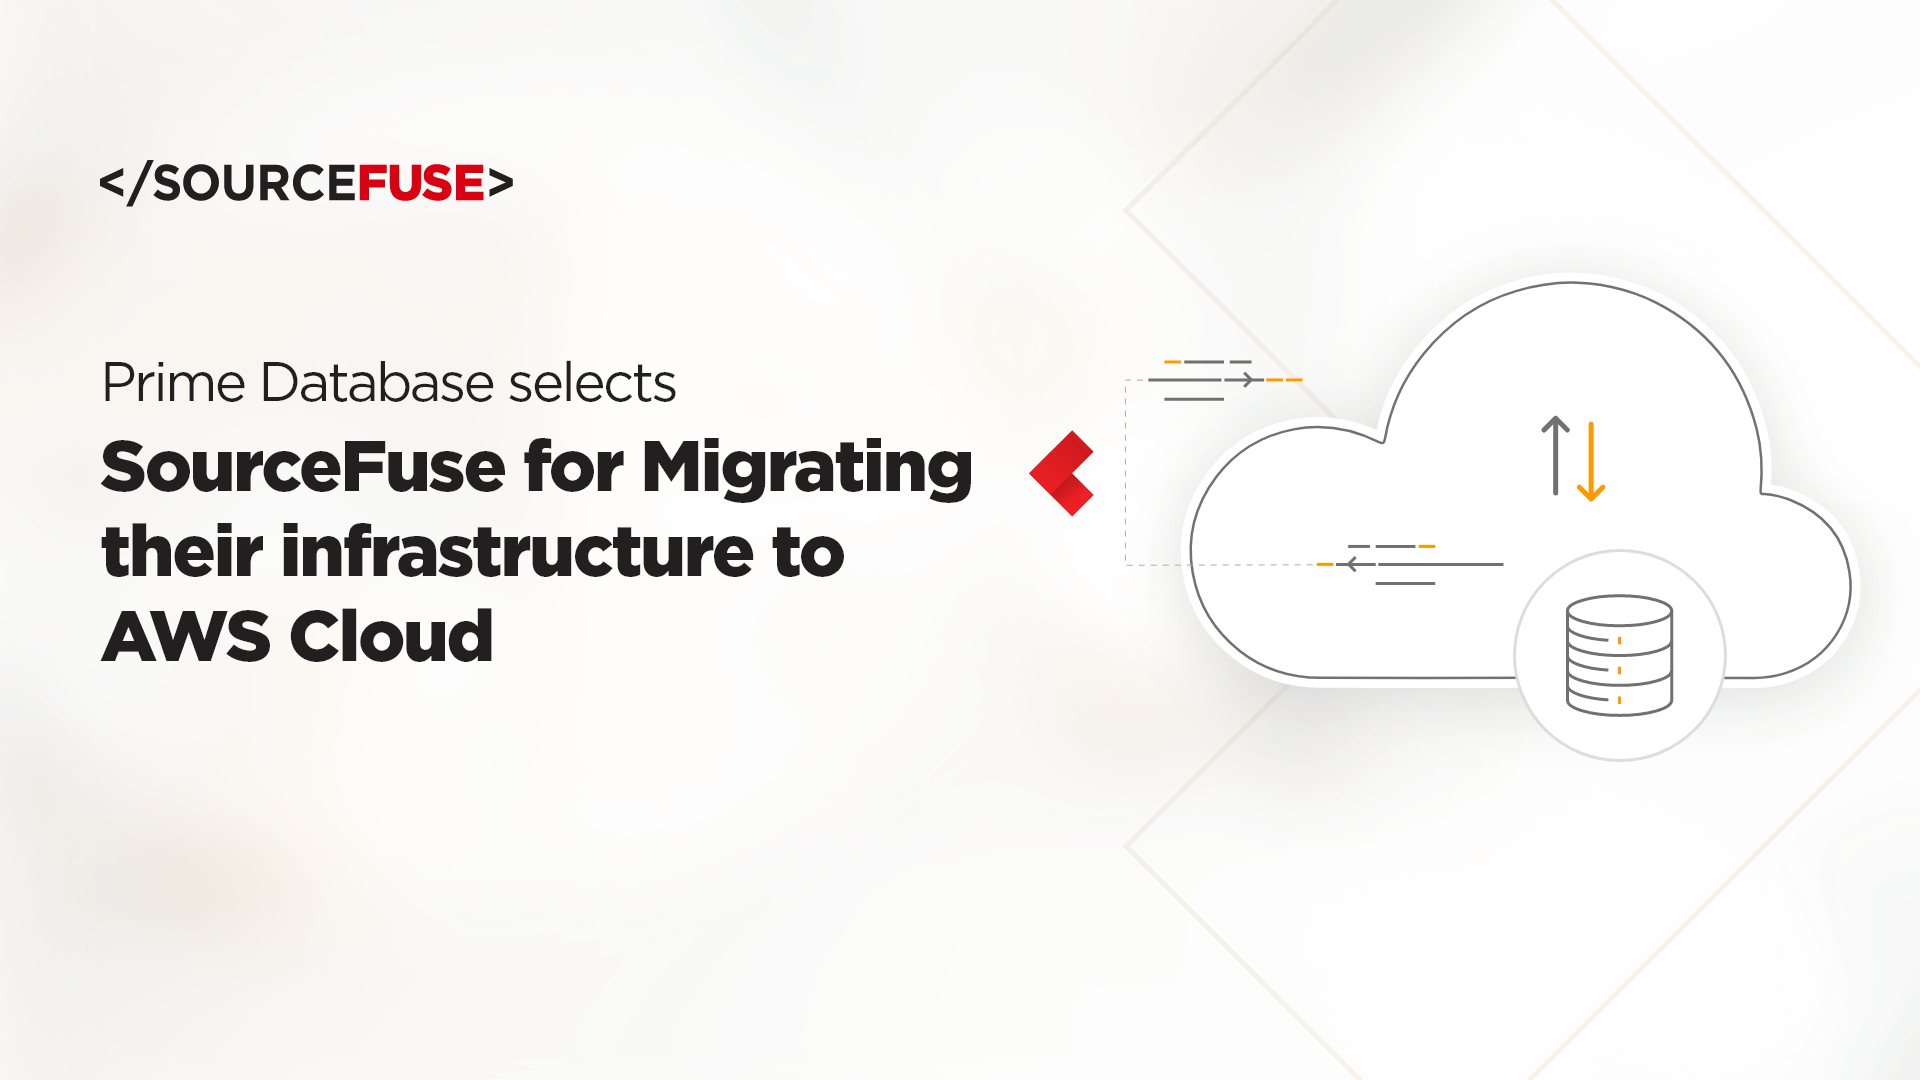 PRIME Database selects SourceFuse for Migrating their infrastructure to AWS Cloud